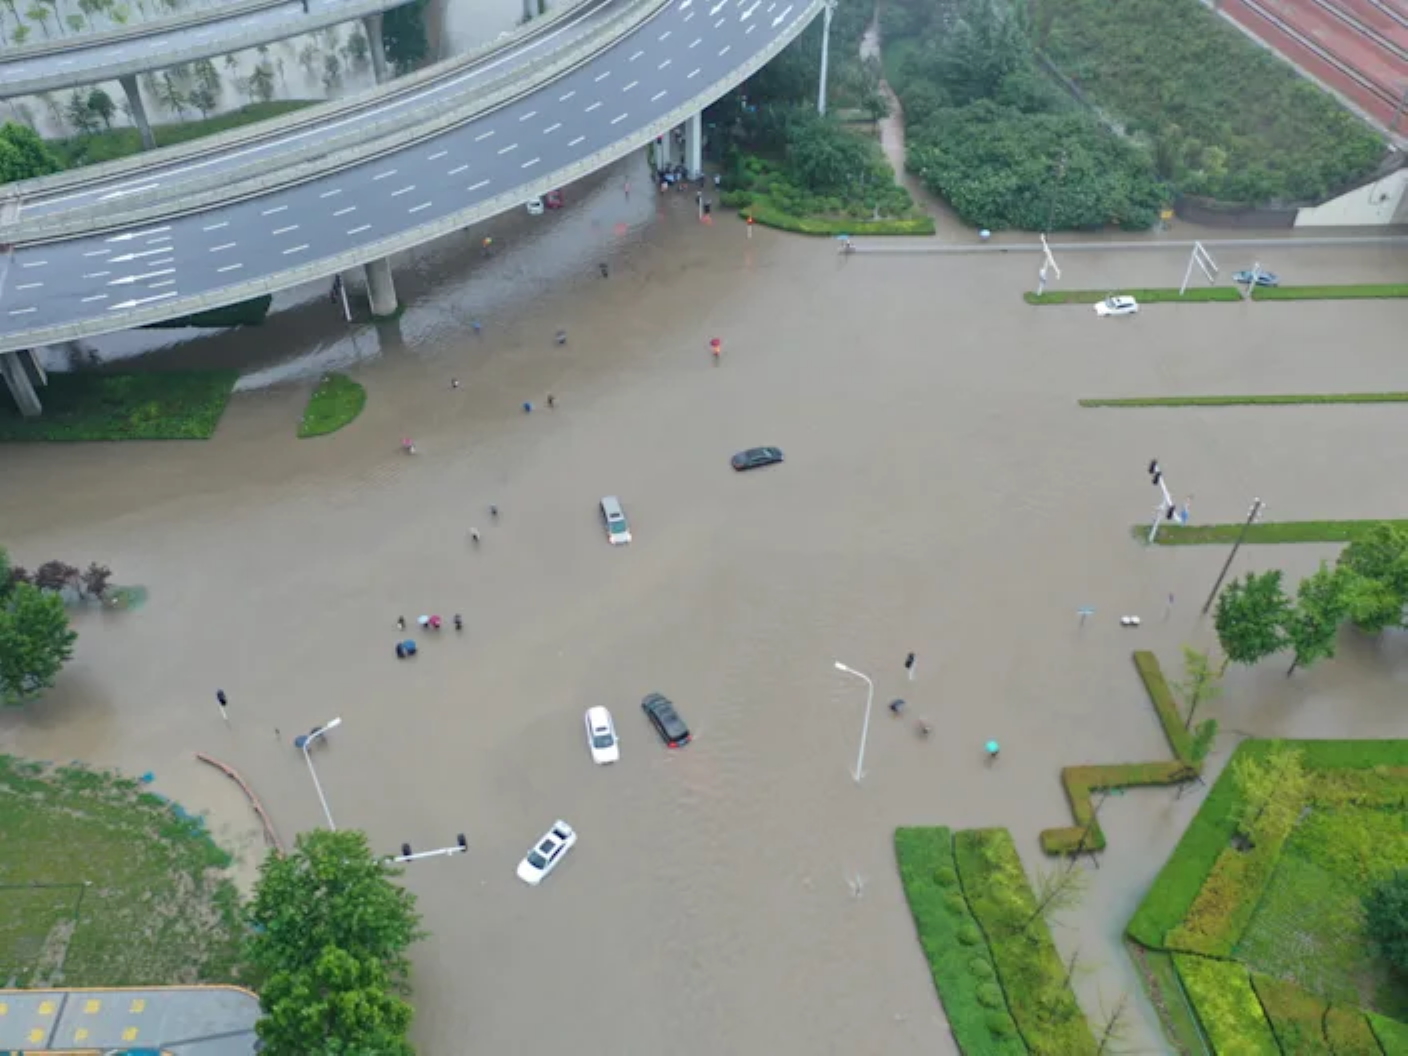 Aerial view of vehicles stranded in floodwater on 20 July 2021 after record rainfall in Zhengzhou, Henan Province of China. Photo: Jiao Xiaoxiang / VCG / Getty Images